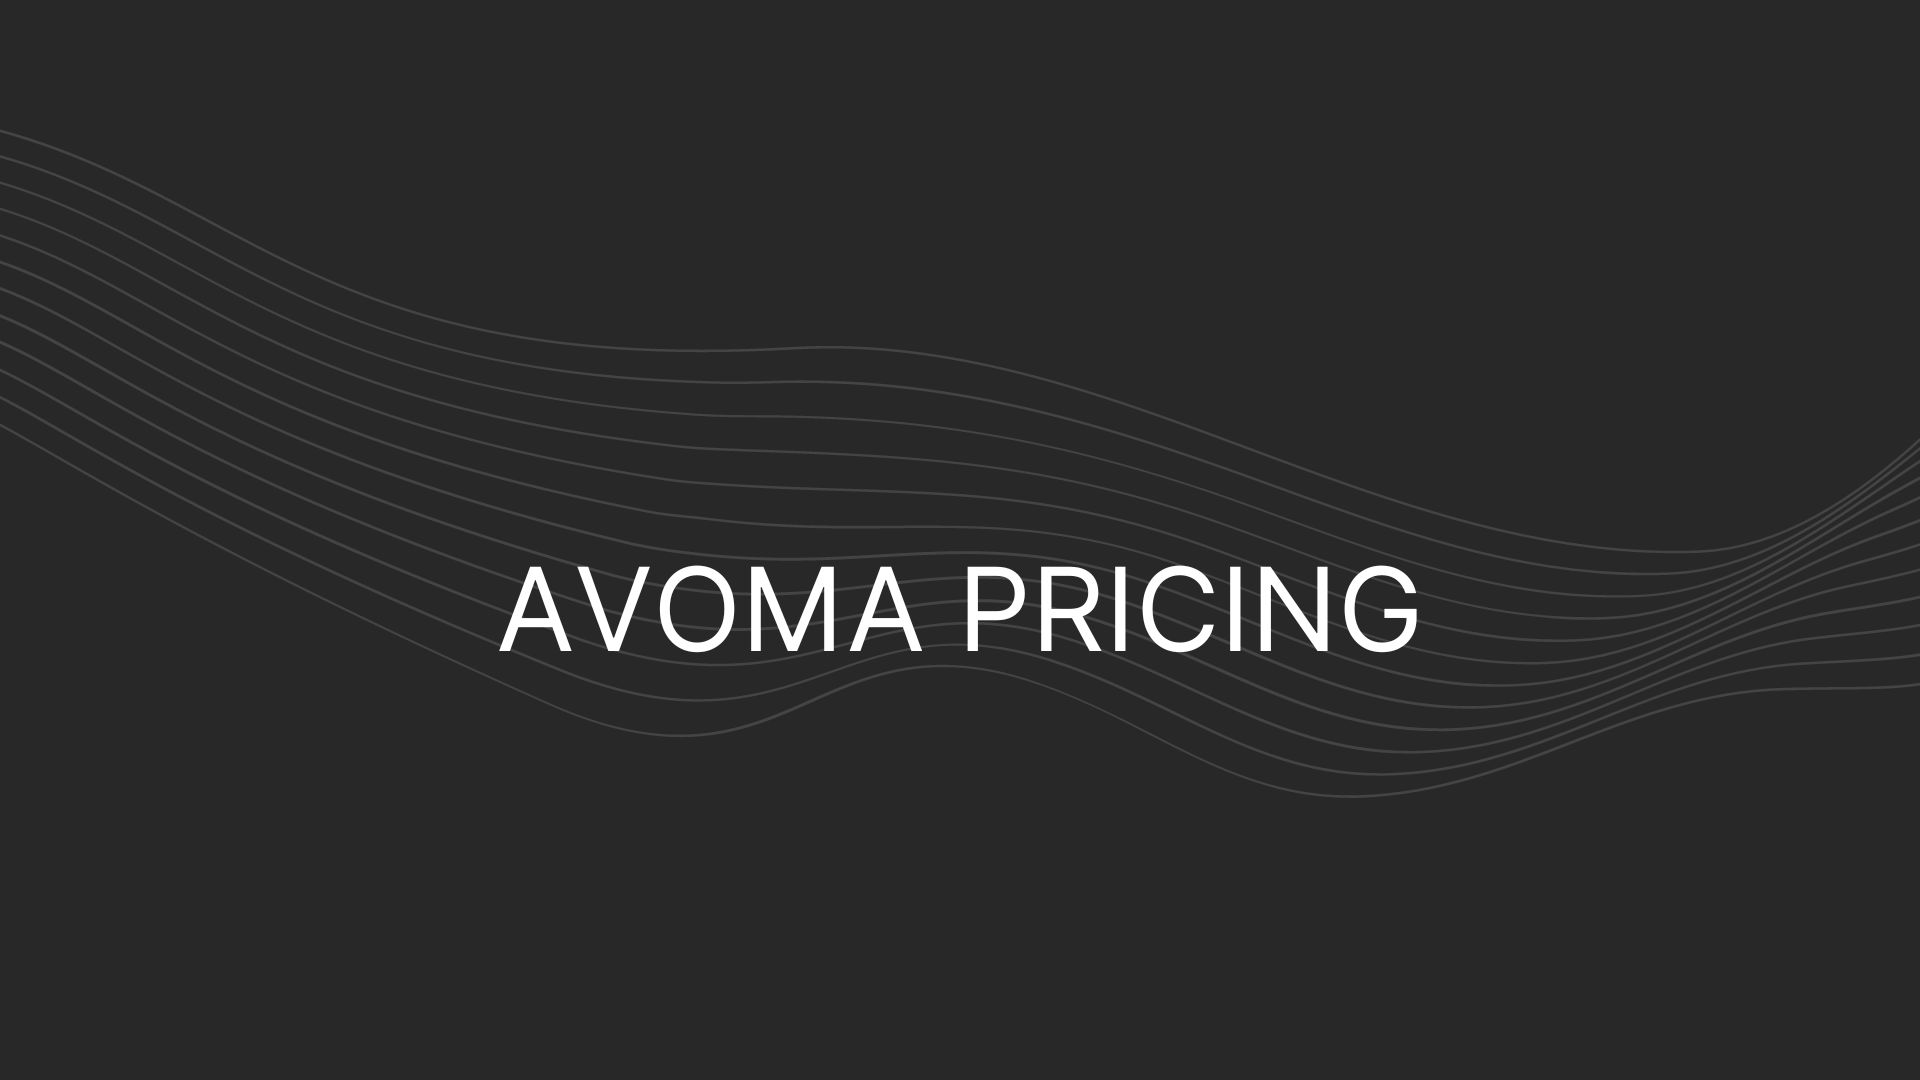 Avoma Pricing – Actual Prices For All Plans, Enterprise Too